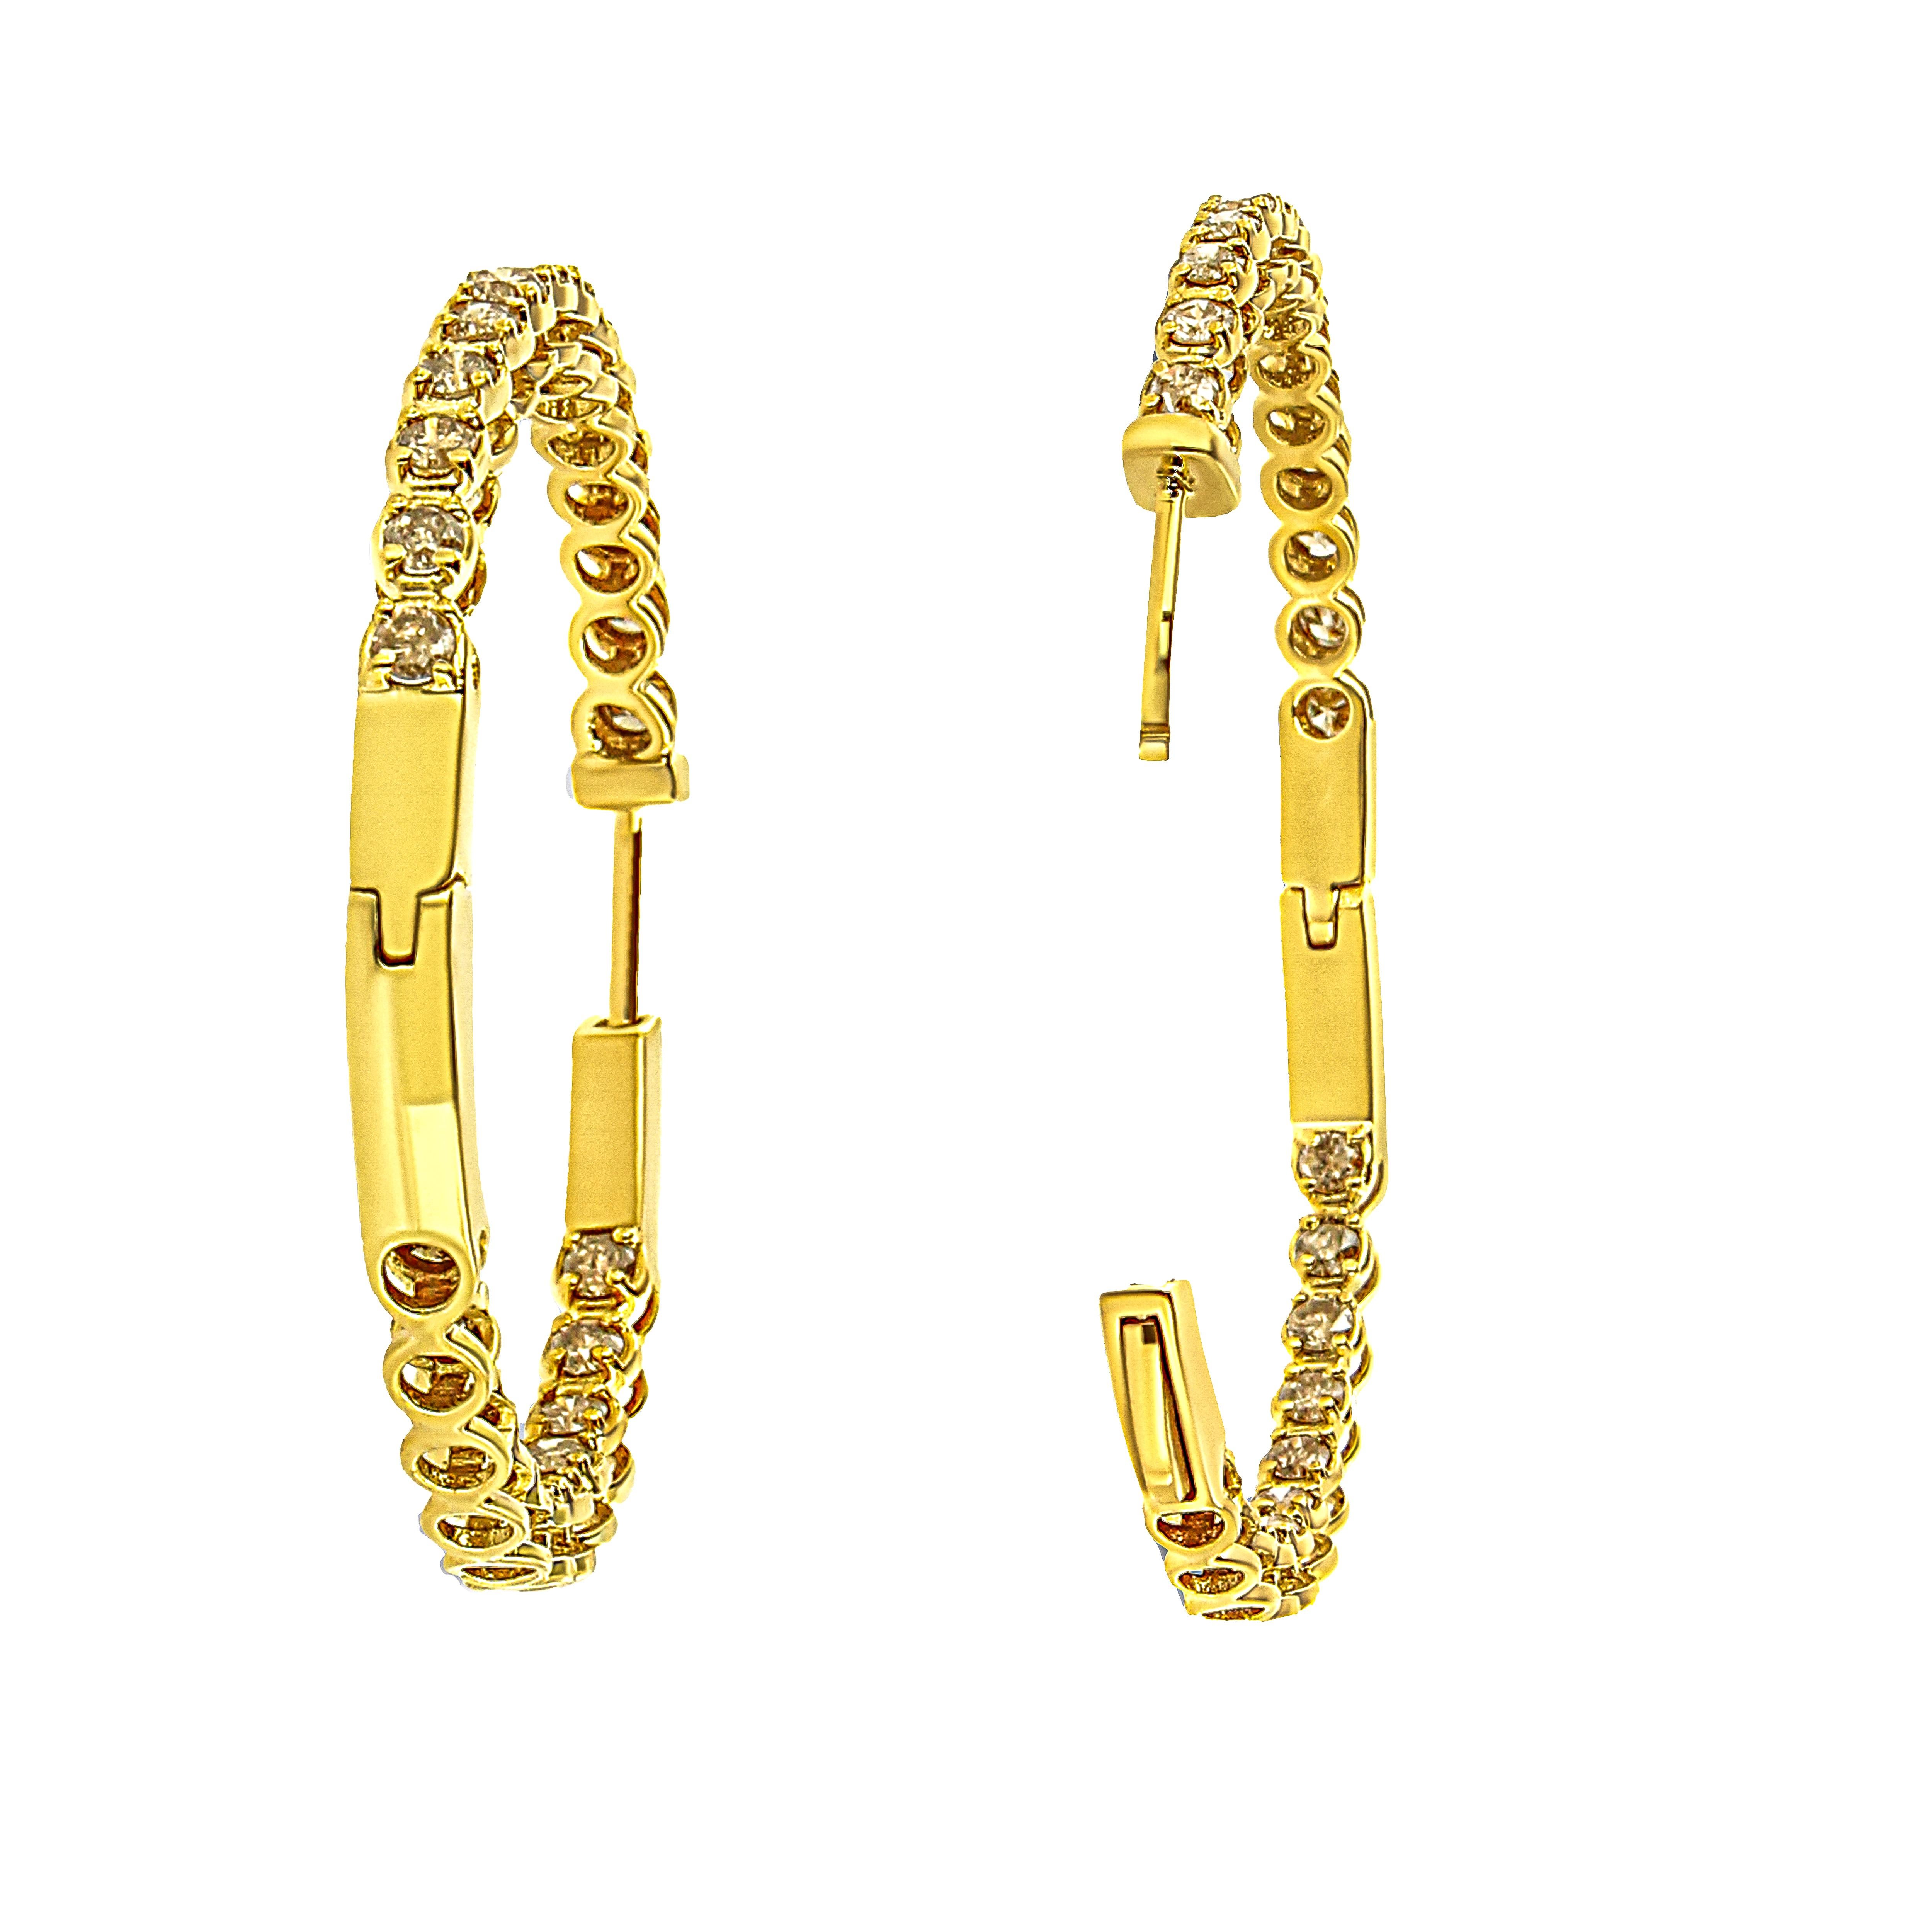 Contemporary Yellow Gold Plated Sterling Silver 3.0 Carat Champagne Diamond Hoop Earrings For Sale